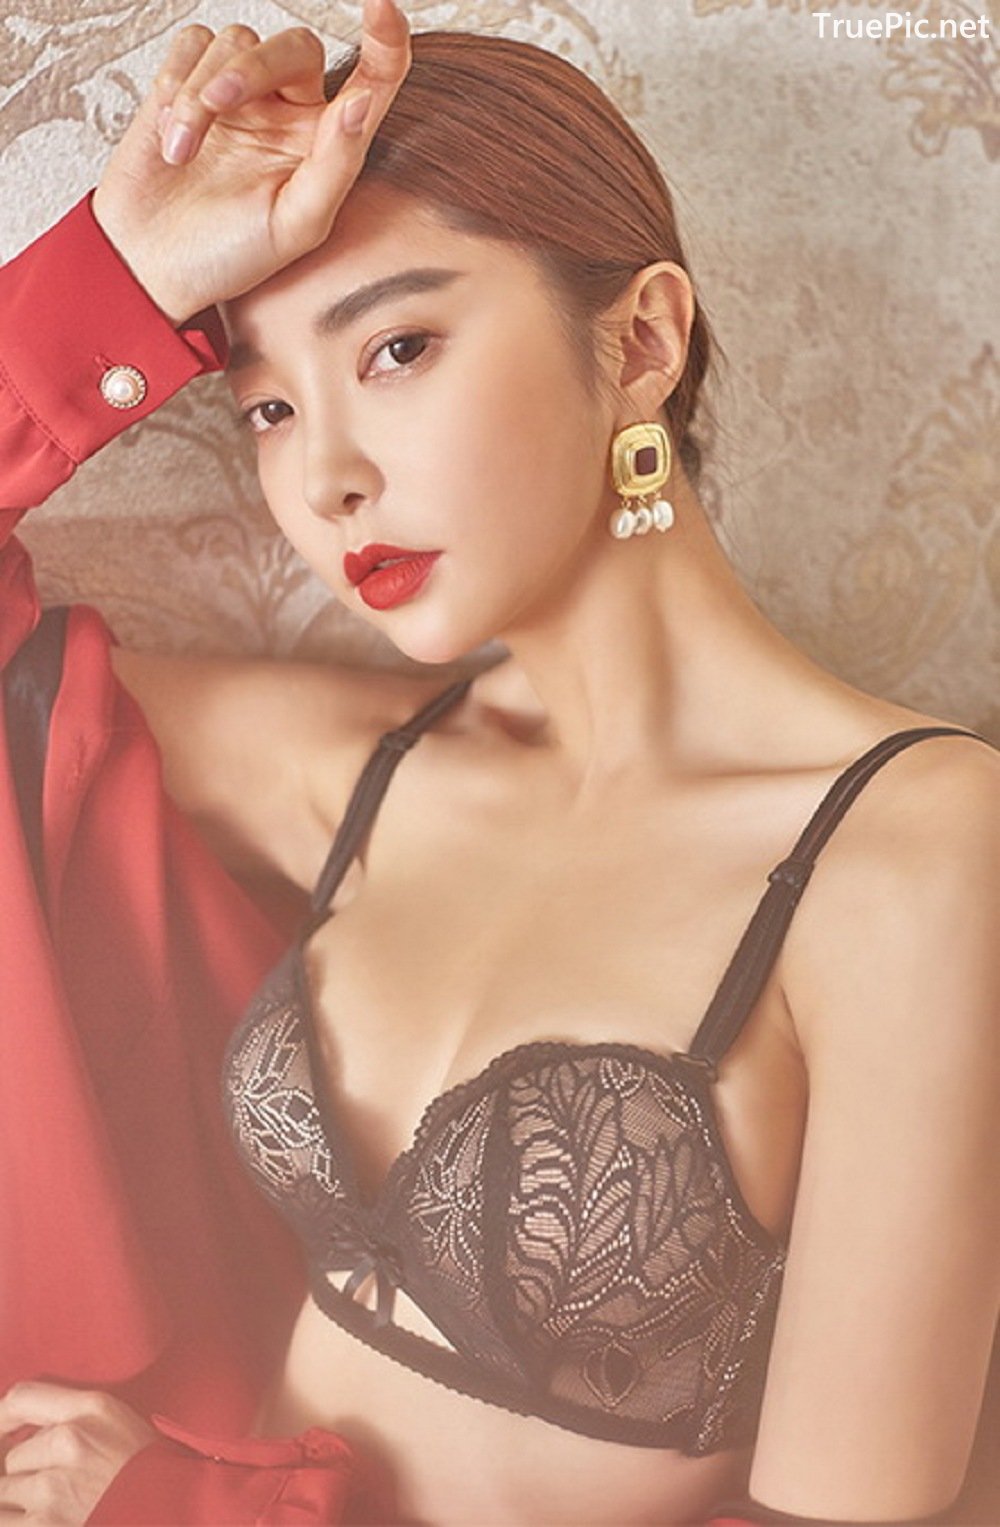 Image-Park-Soo-Yeon-Black-Red-and-White-Lingerie-Korean-Model-Fashion-TruePic.net- Picture-29